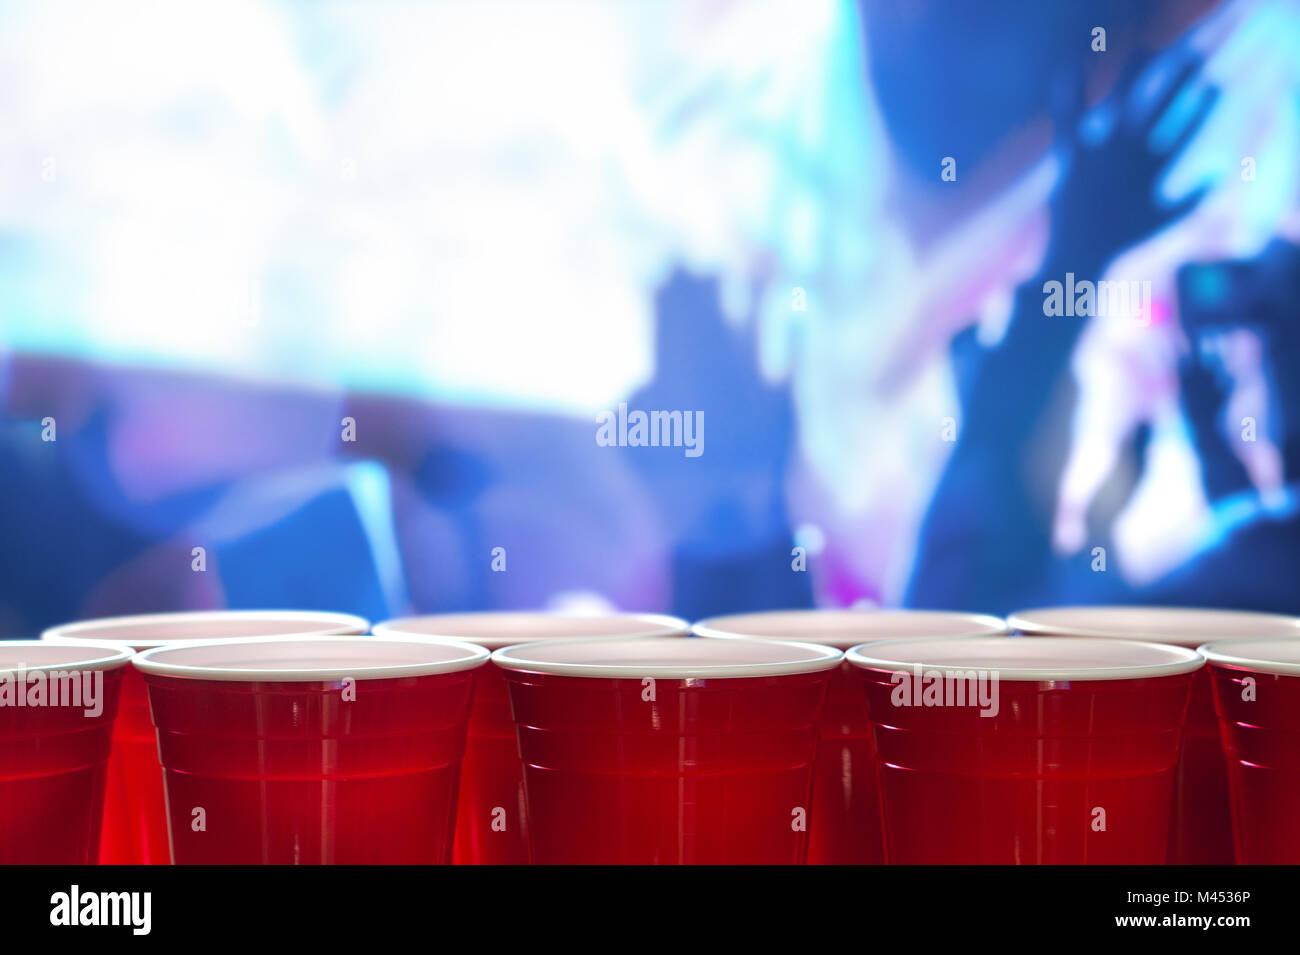 Plastic red party cups in a row in a nightclub full of people dancing on the dance floor in the background. Perfect for marketing and promotion. Stock Photo